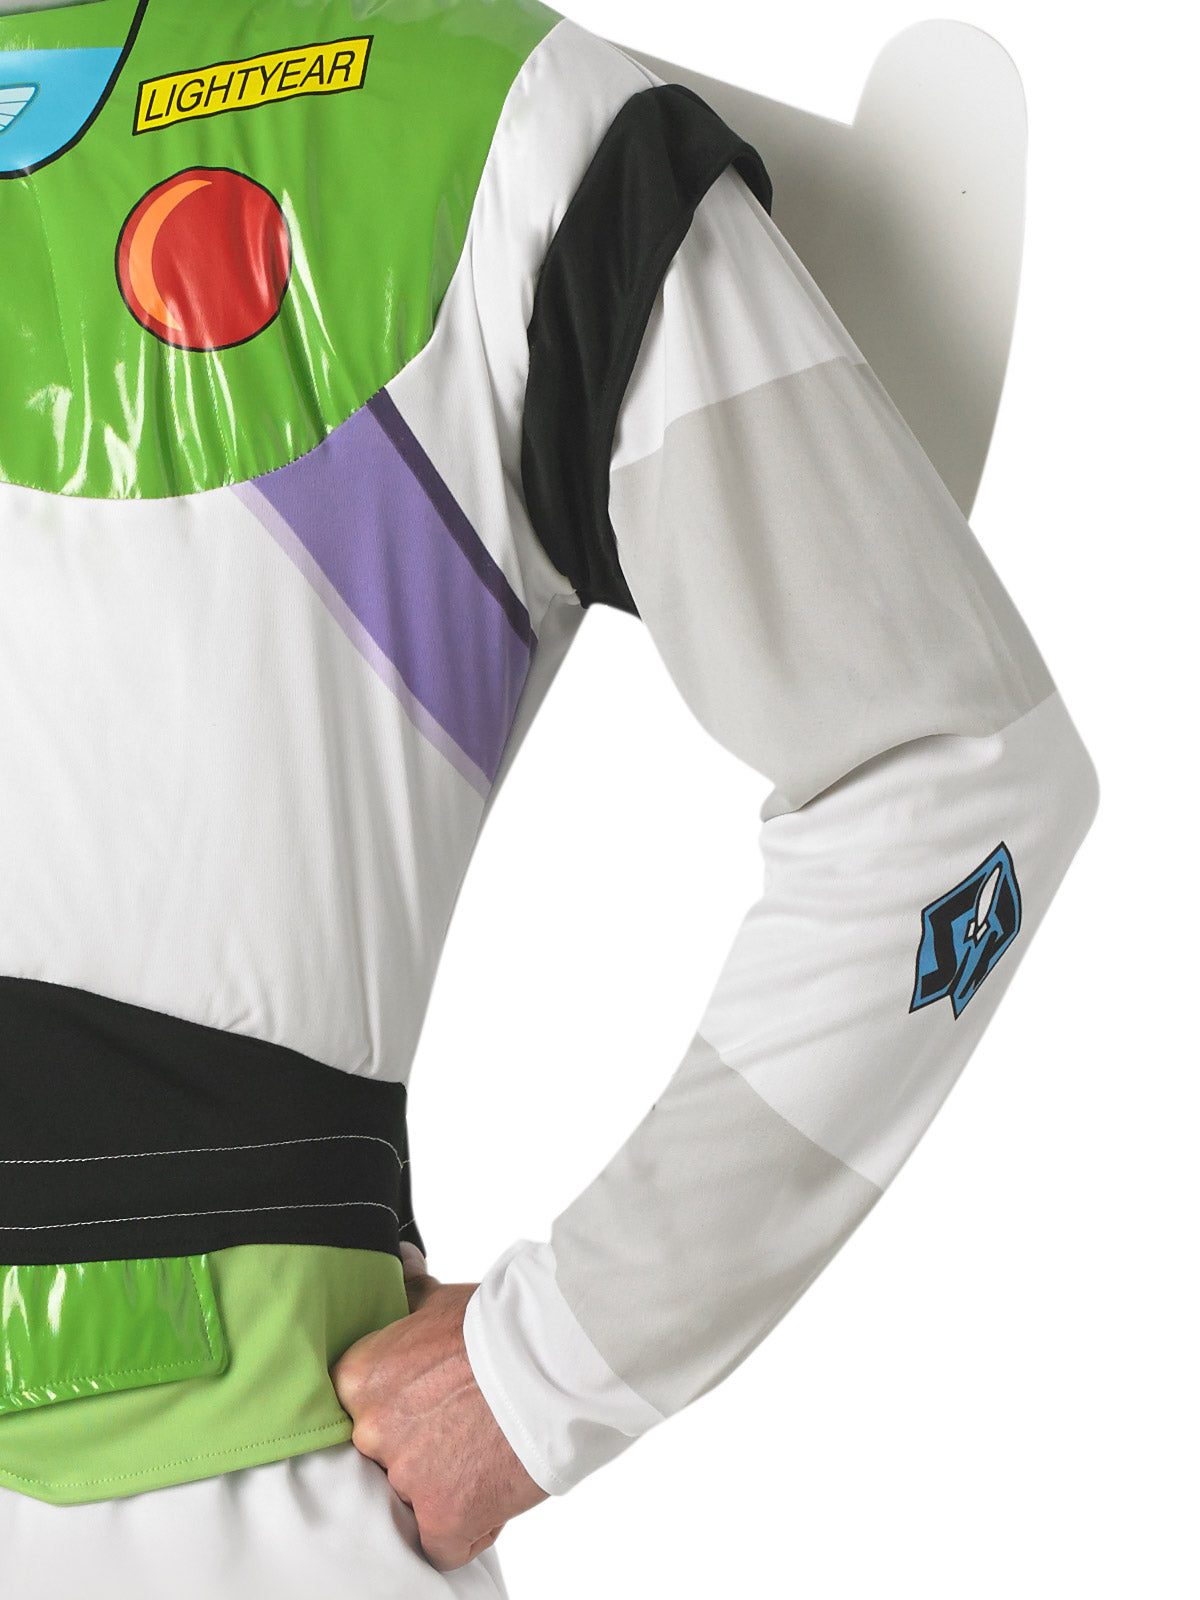 Buzz Lightyear Costume for Adults - Disney Pixar Toy Story